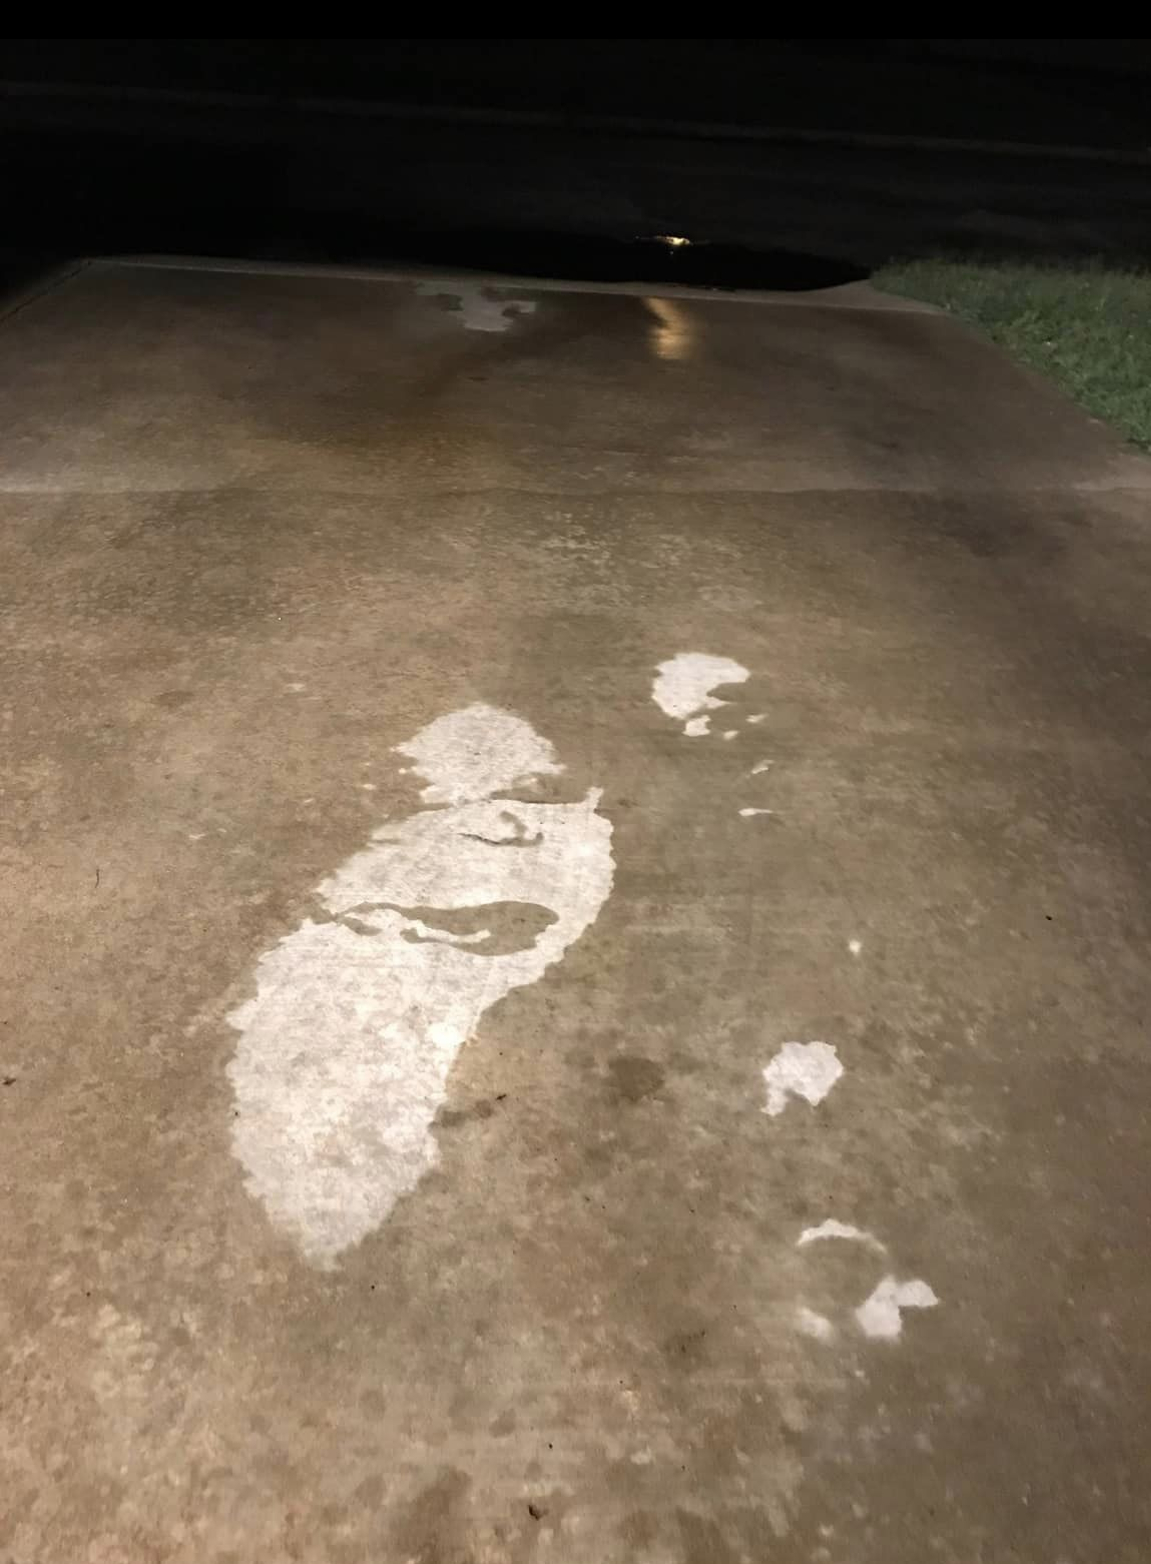 The face of Ozzy Osbourne on a woman’s driveway.